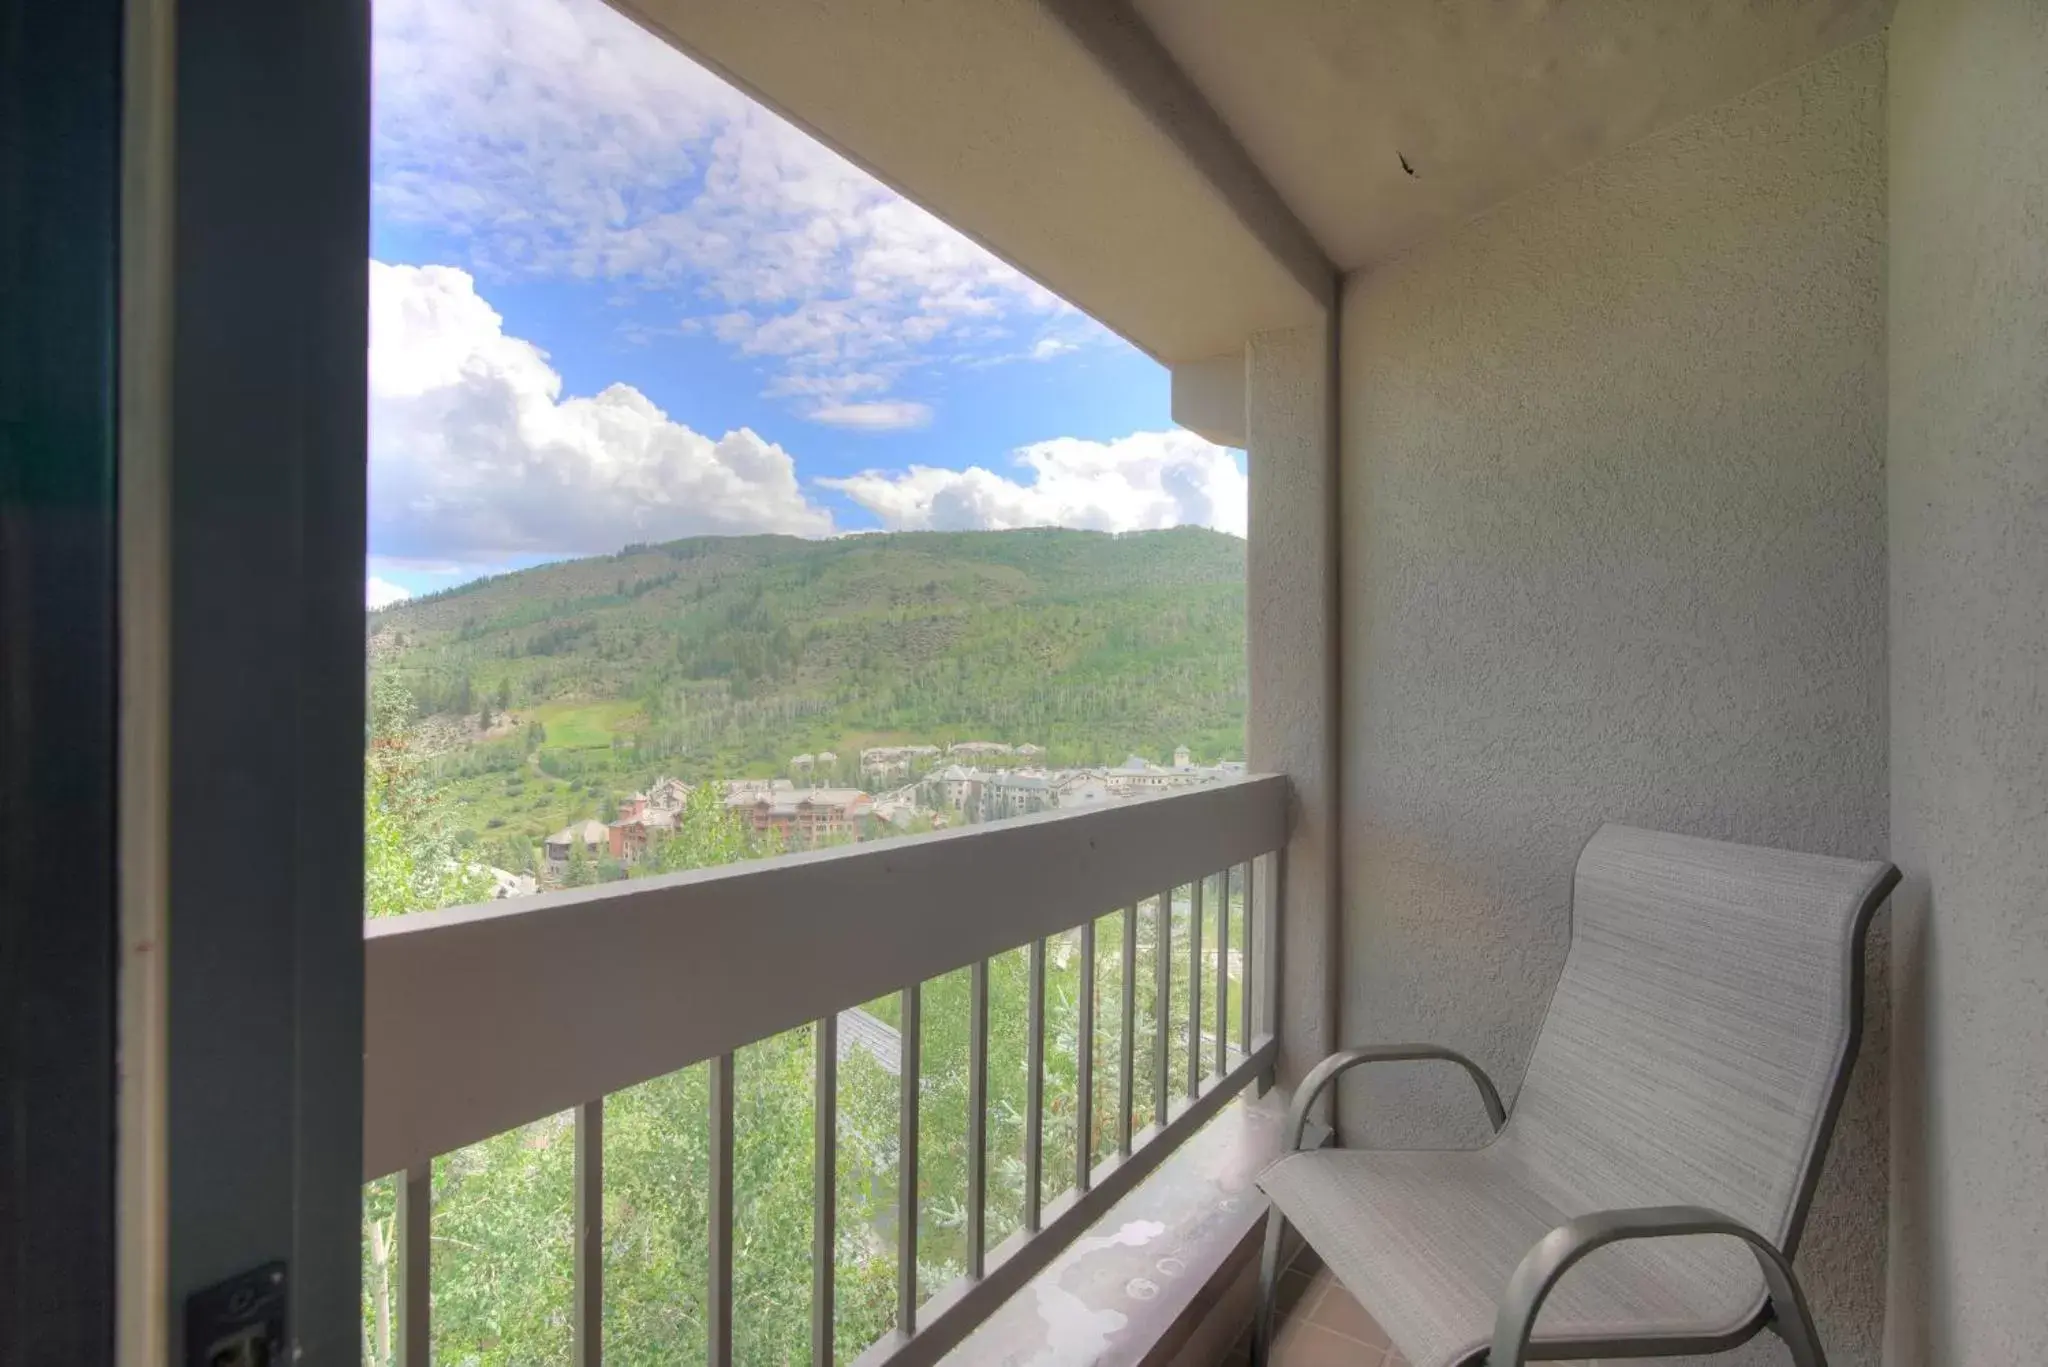 Balcony/Terrace, Mountain View in The Pines Lodge, a RockResort